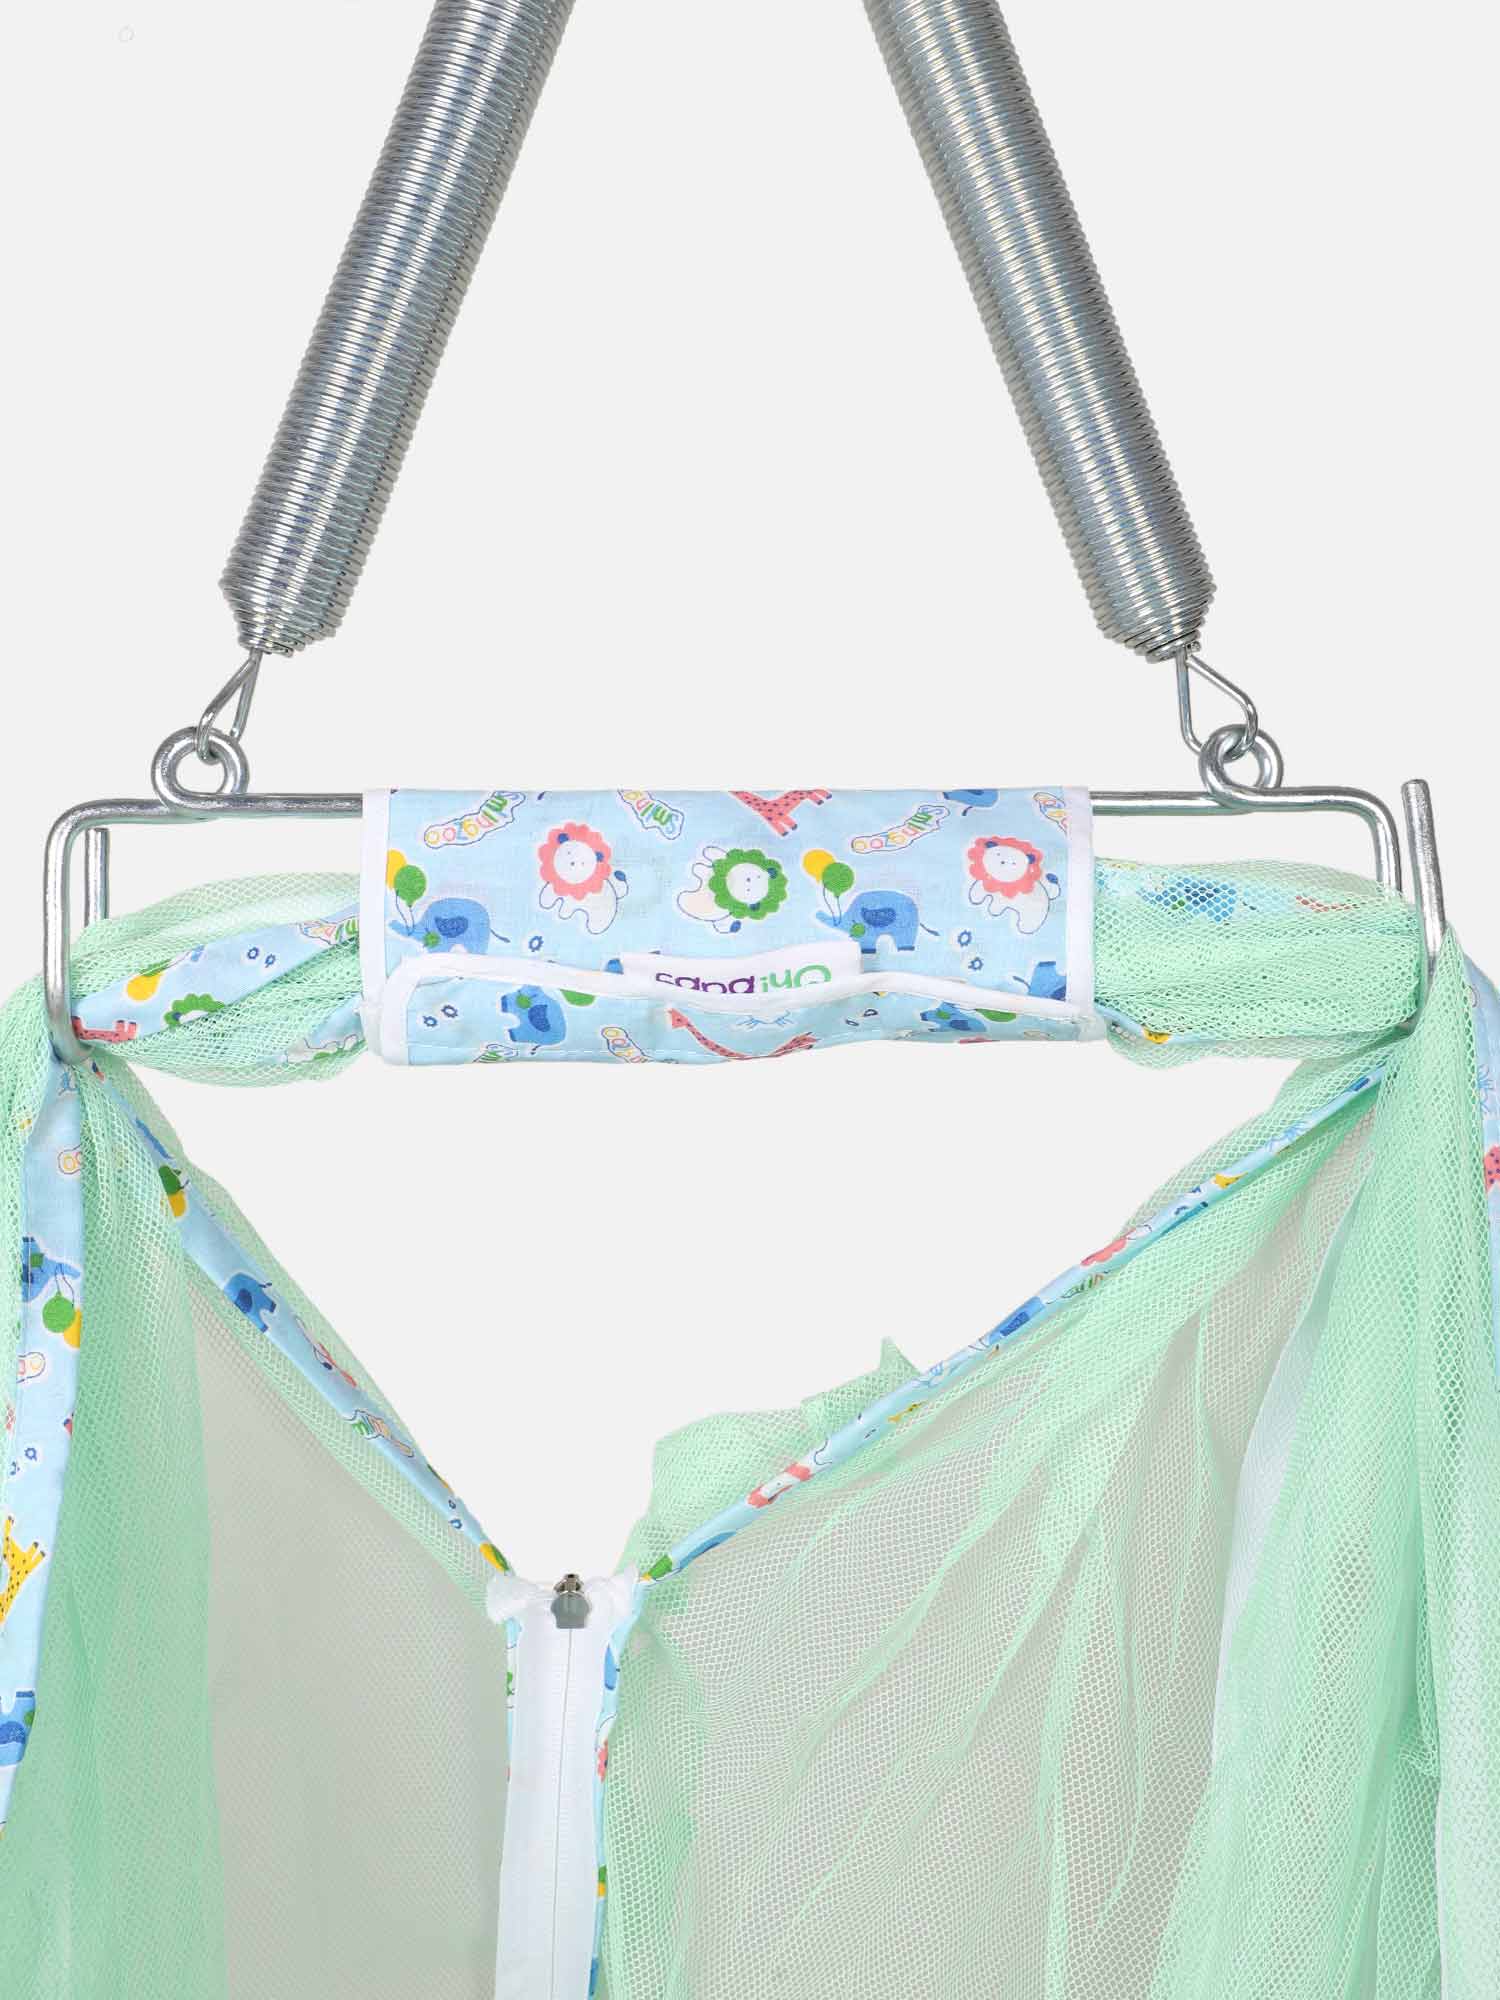 Oh Baby 100% Cotton Printed Infants Thuli Mosquito Net Bed for Kids - Bepr